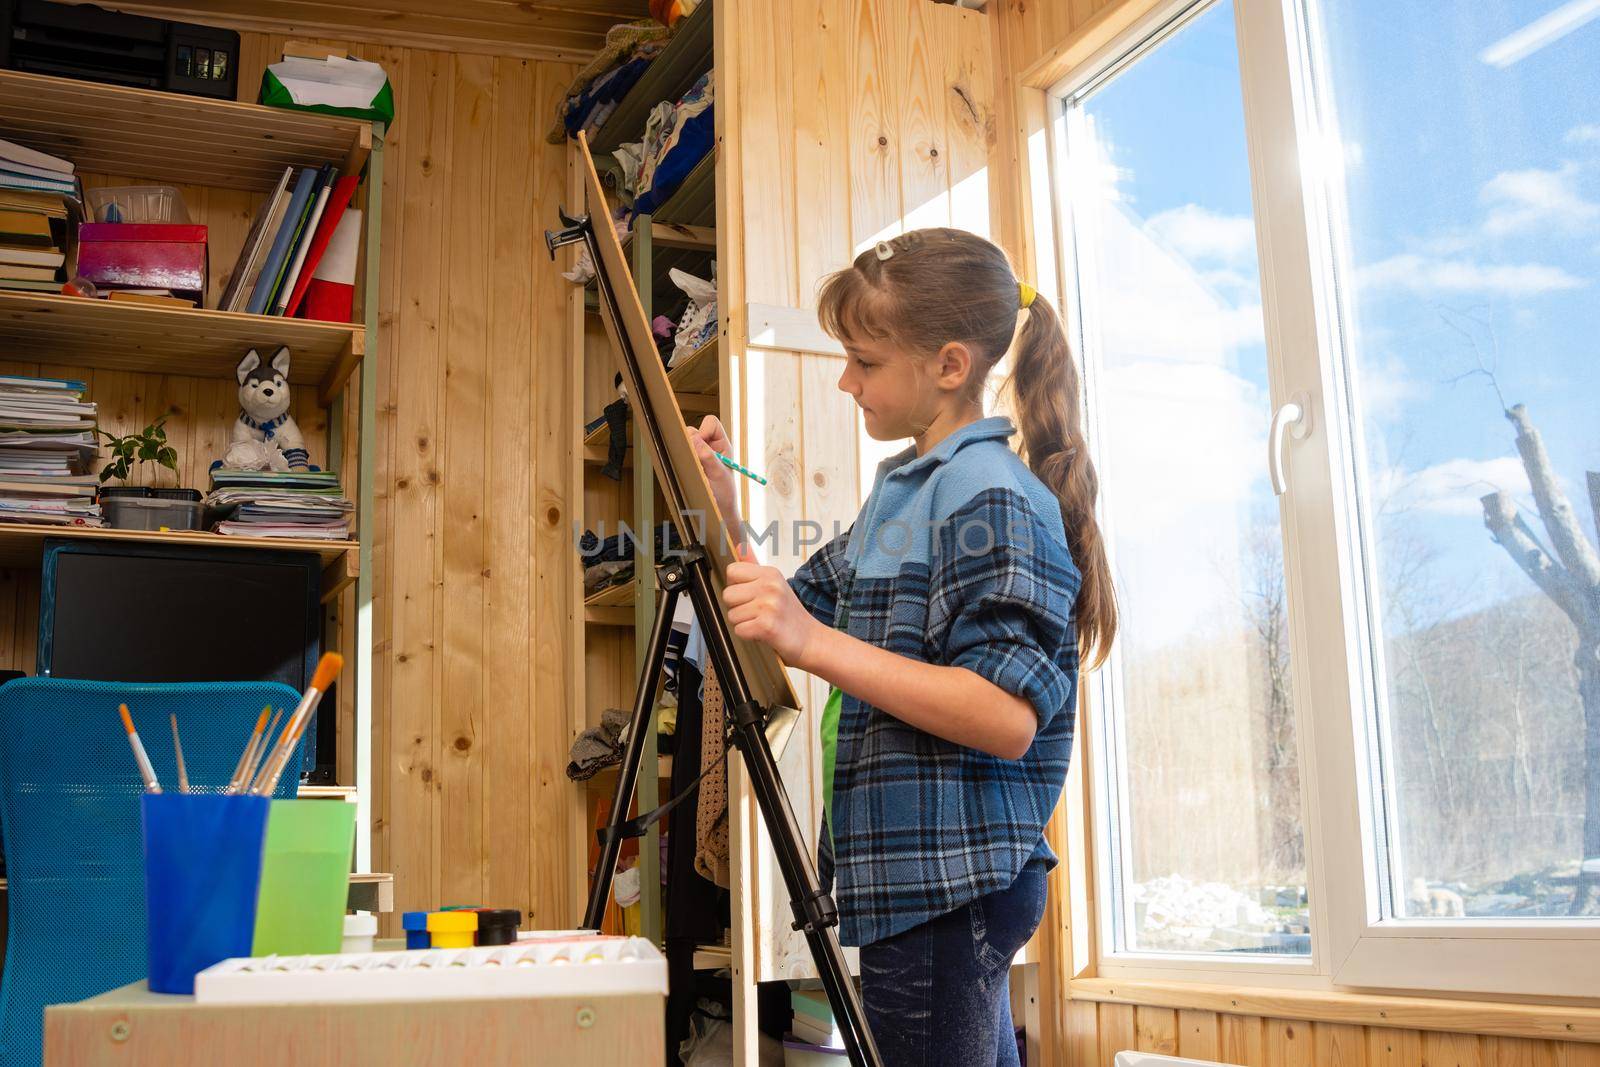 A ten-year-old girl draws on an easel by the wide window of the house